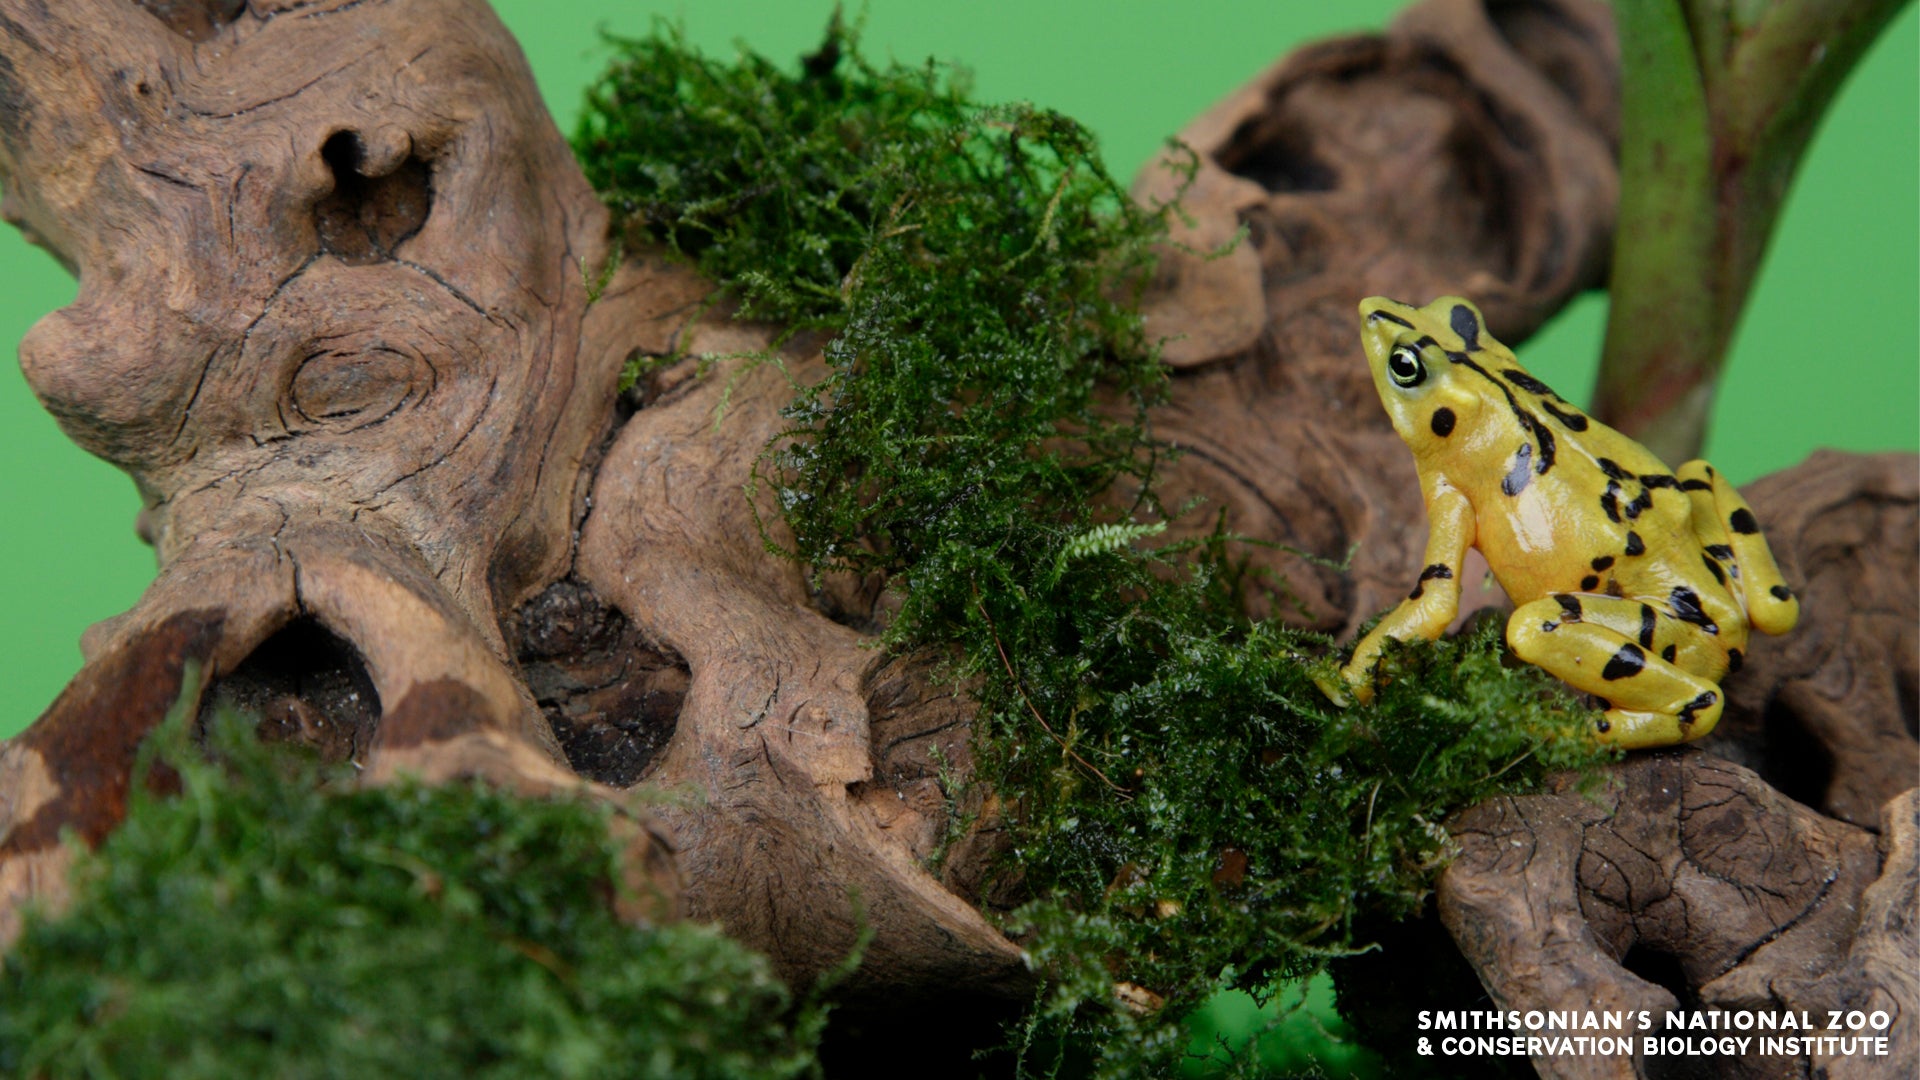 A Panamanian golden frog standing on a mossy log